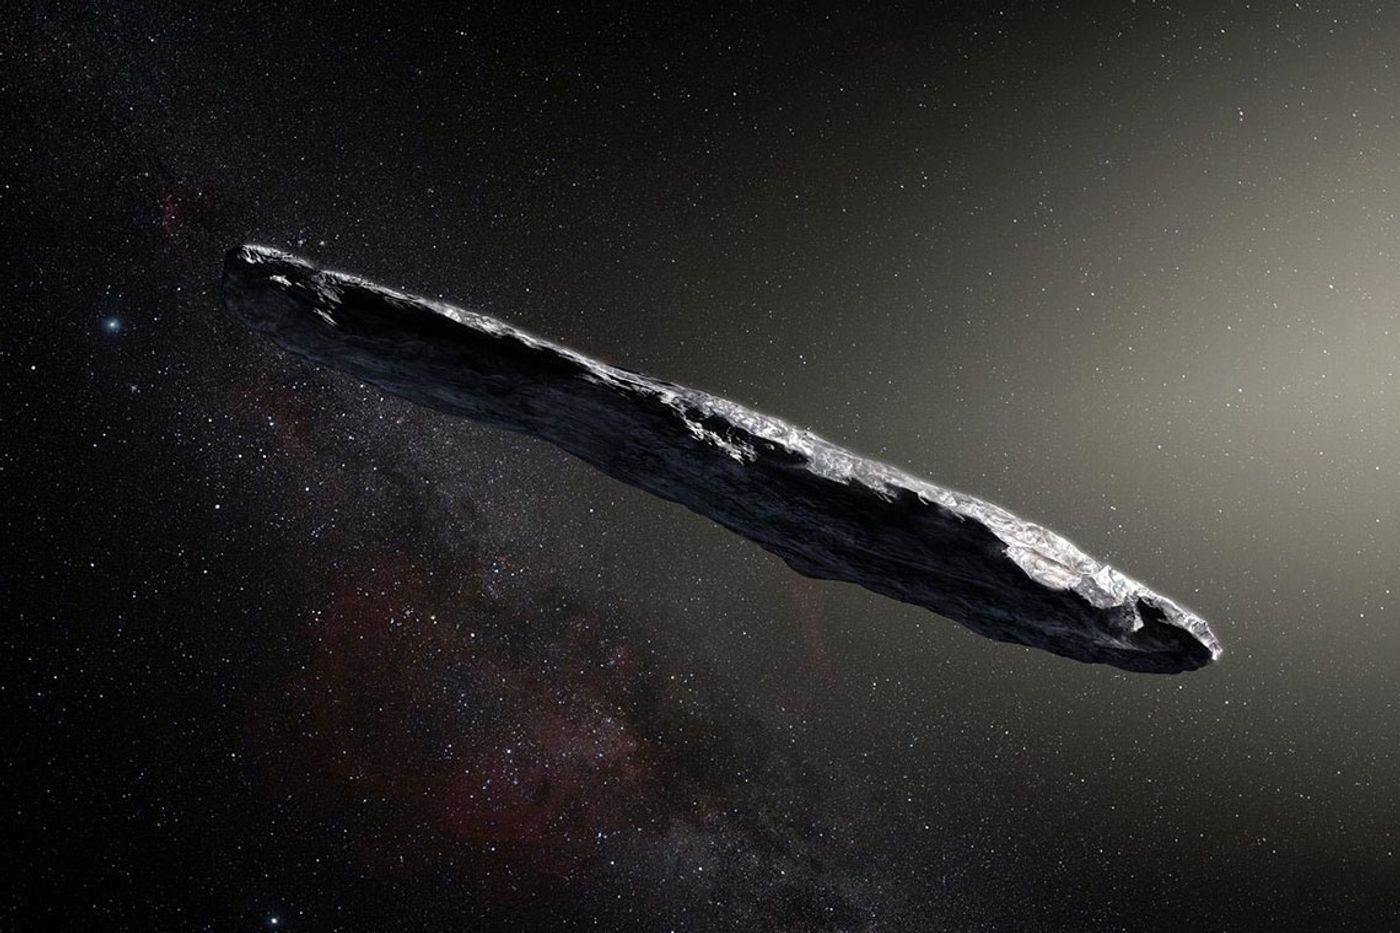 An artist's rendering of the cigar-shaped Oumuamua.